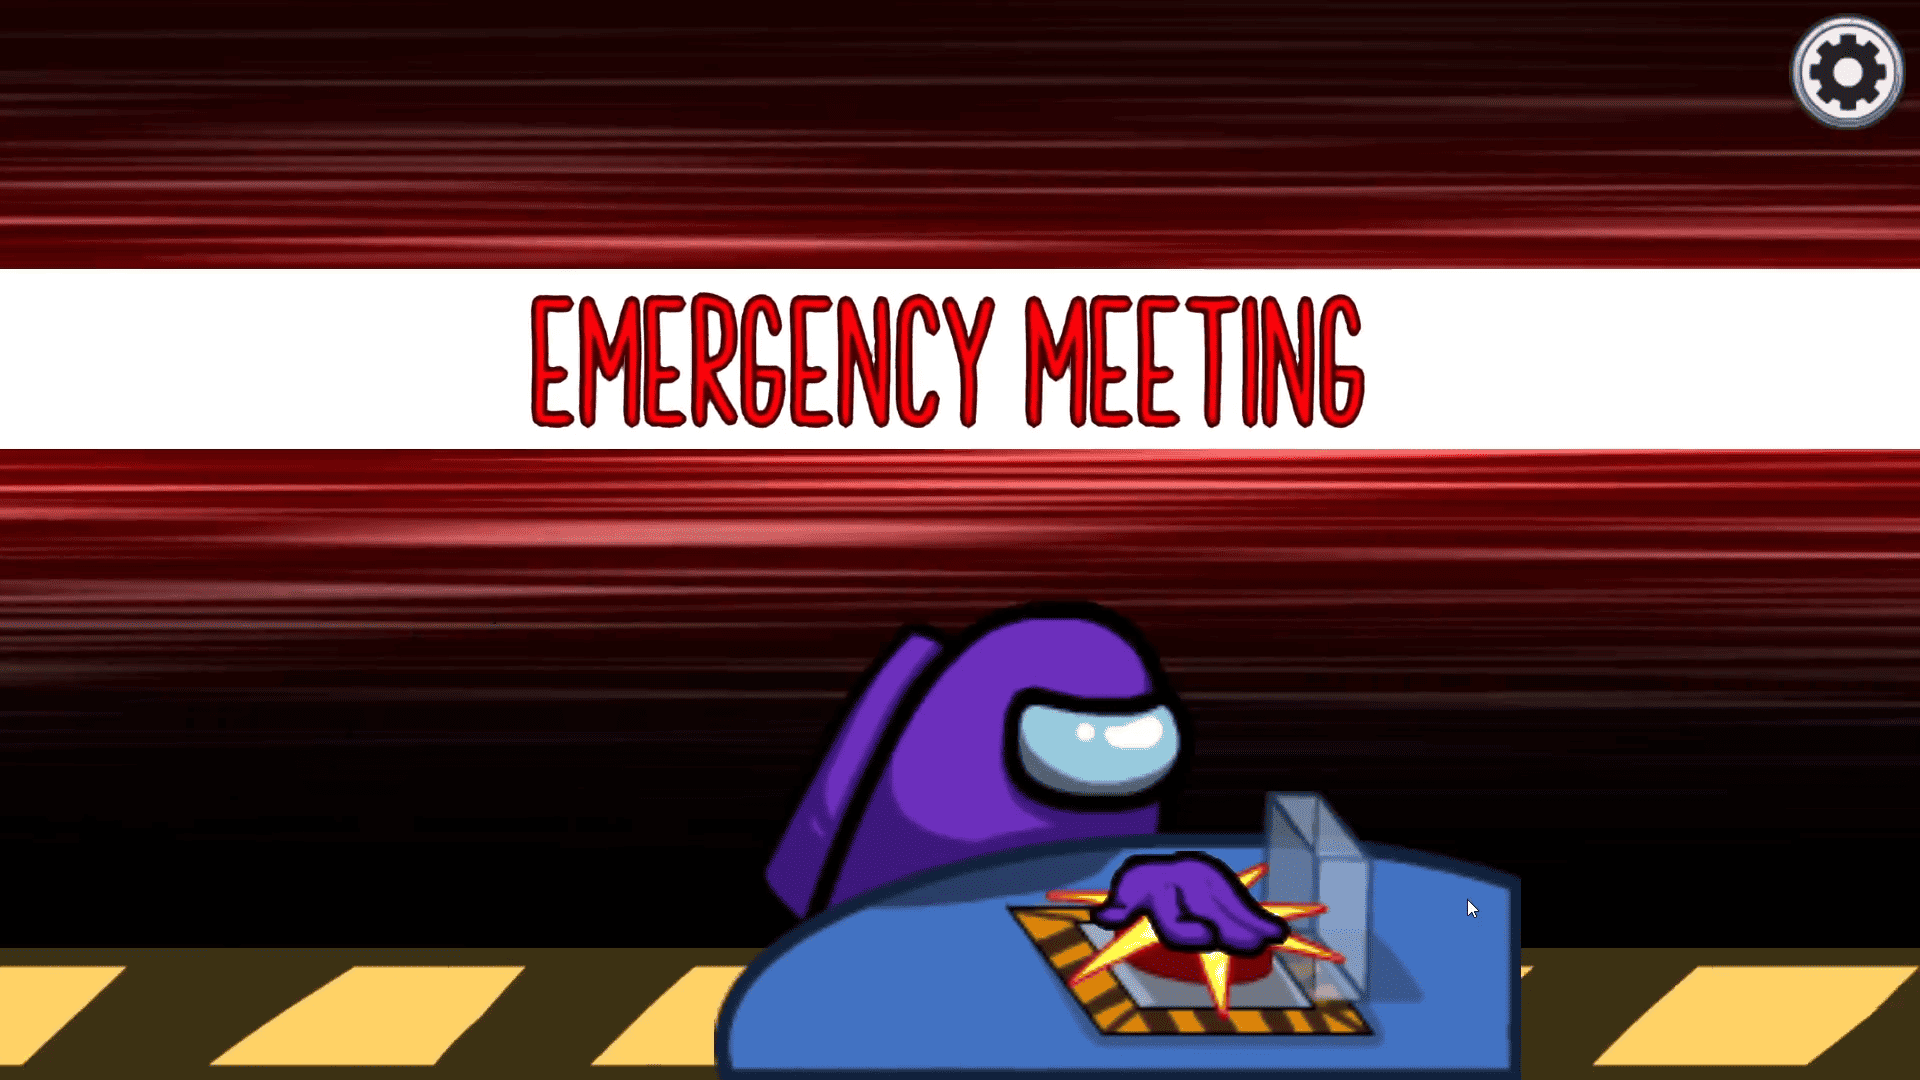 An image of the purple Among Us character slamming a big red button calling an emergency meeting